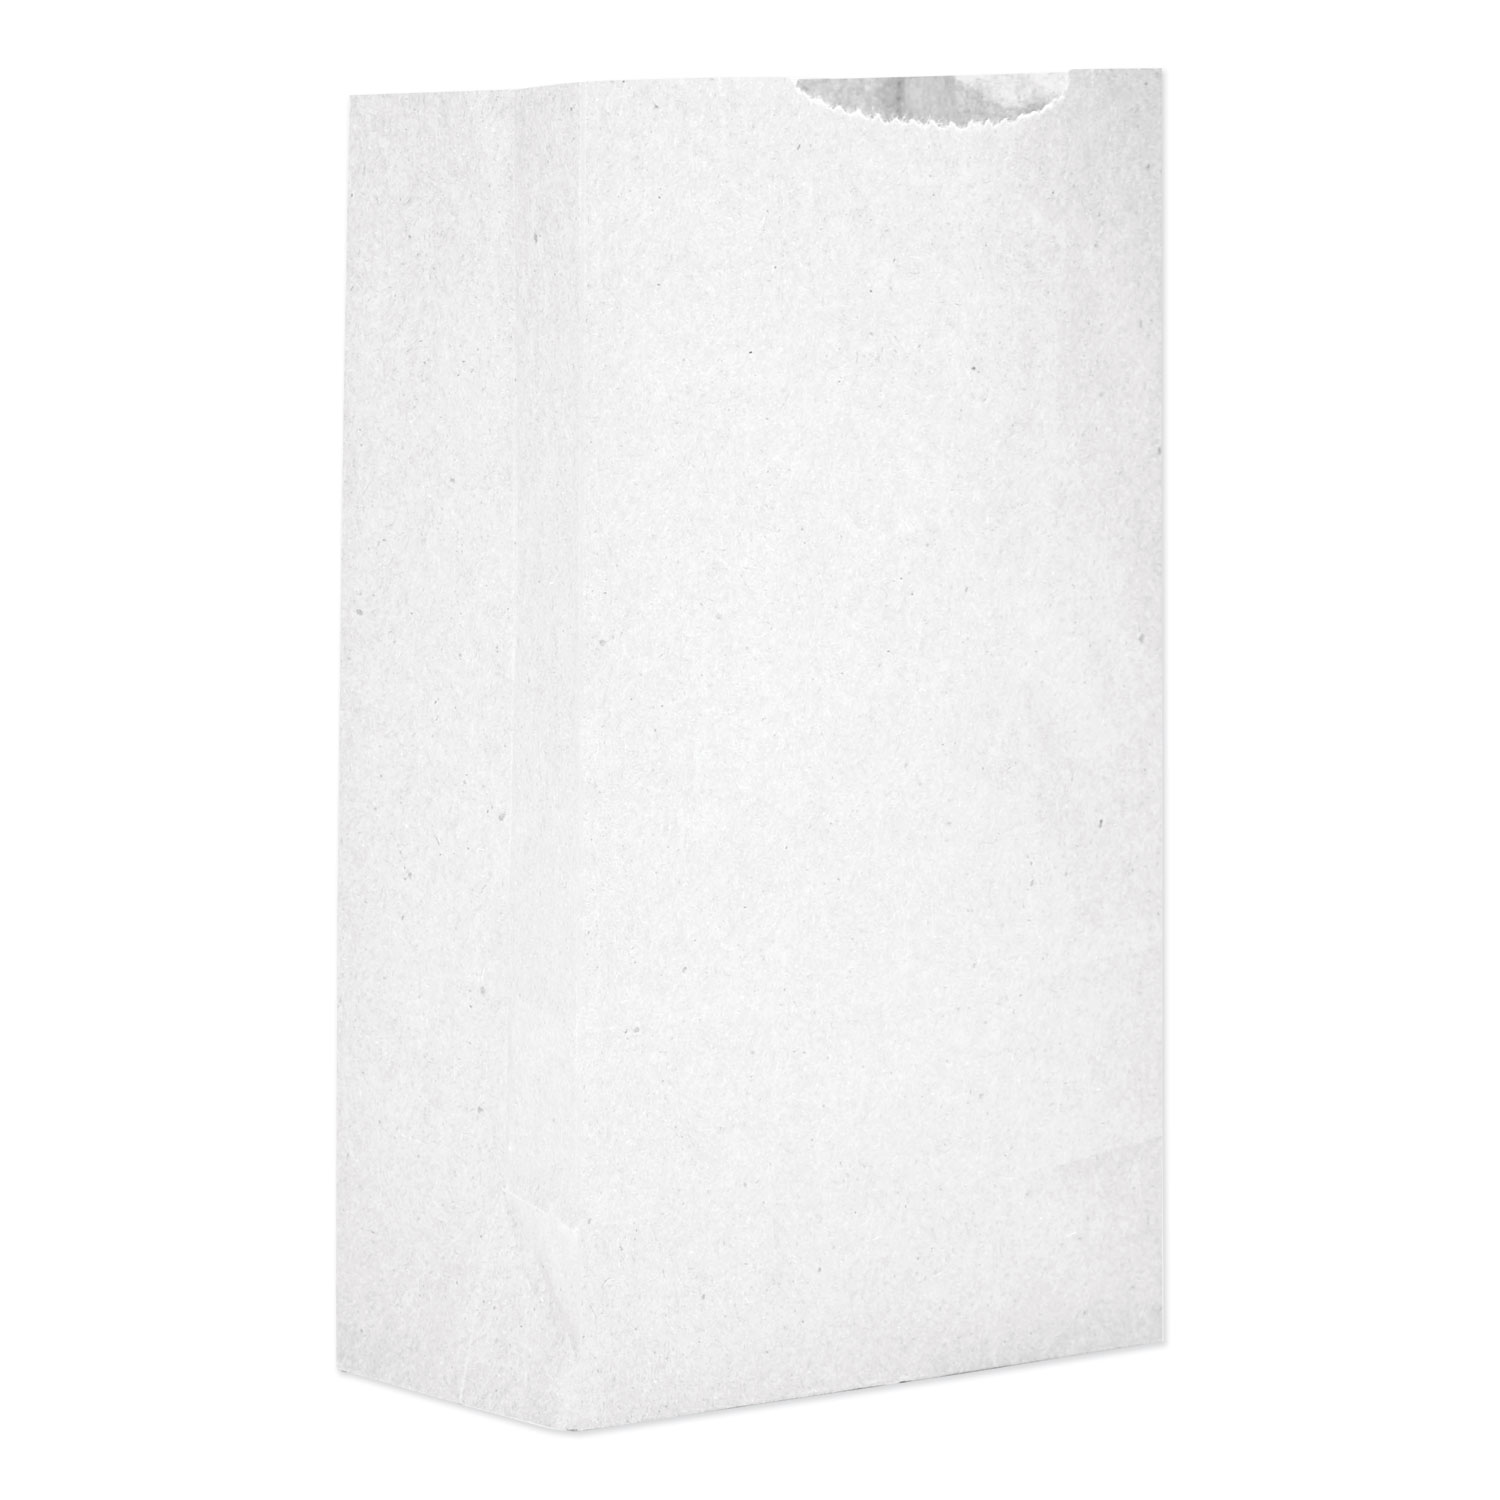  General 51002 Grocery Paper Bags, 30 lbs Capacity, #2, 4.31w x 2.44d x 7.88h, White, 500 Bags (BAGGW2500) 